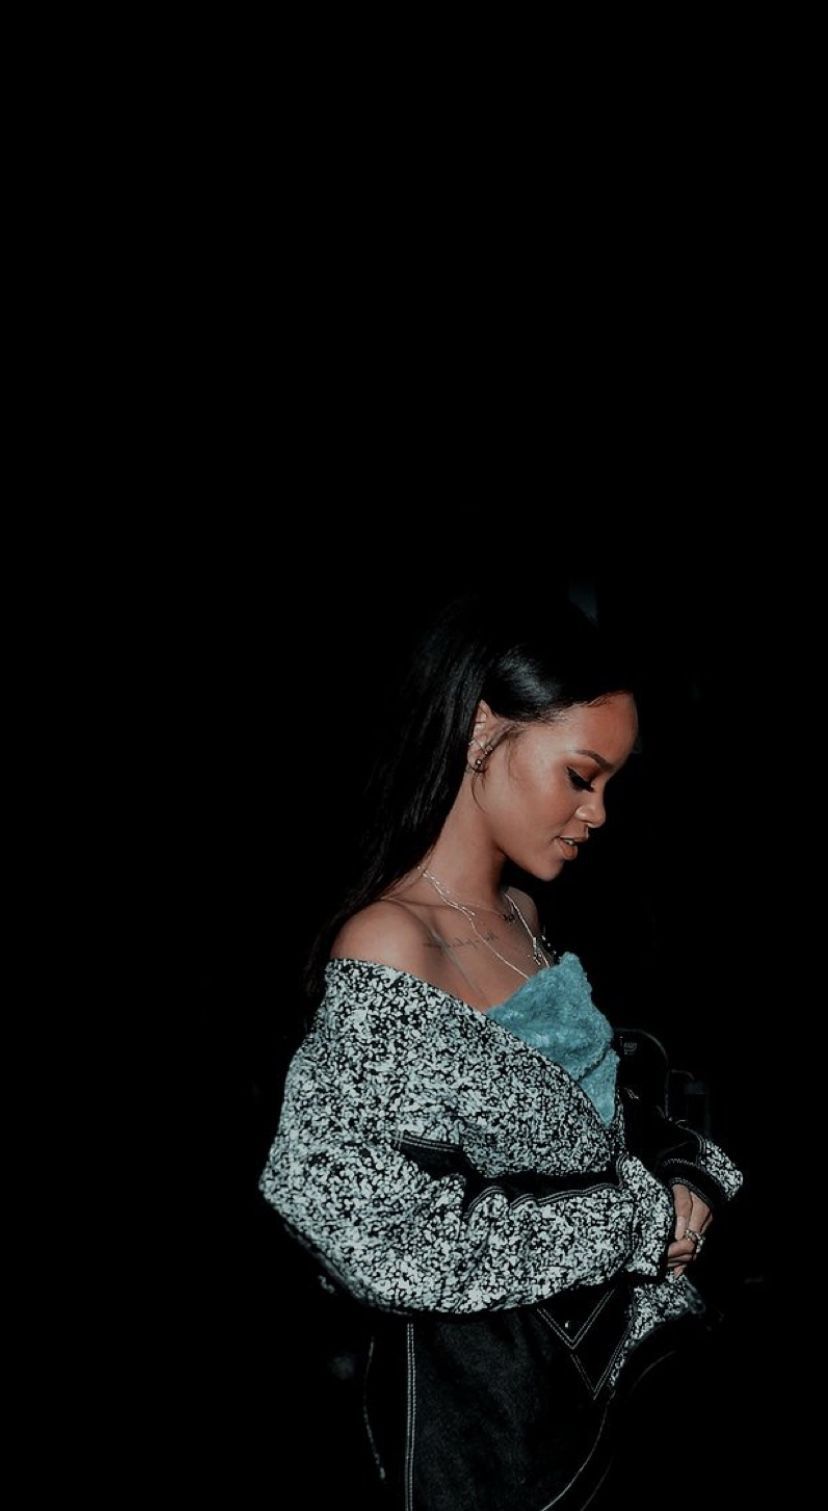 IPhone wallpaper of Rihanna in a black and white top with a blue bralette - Rihanna